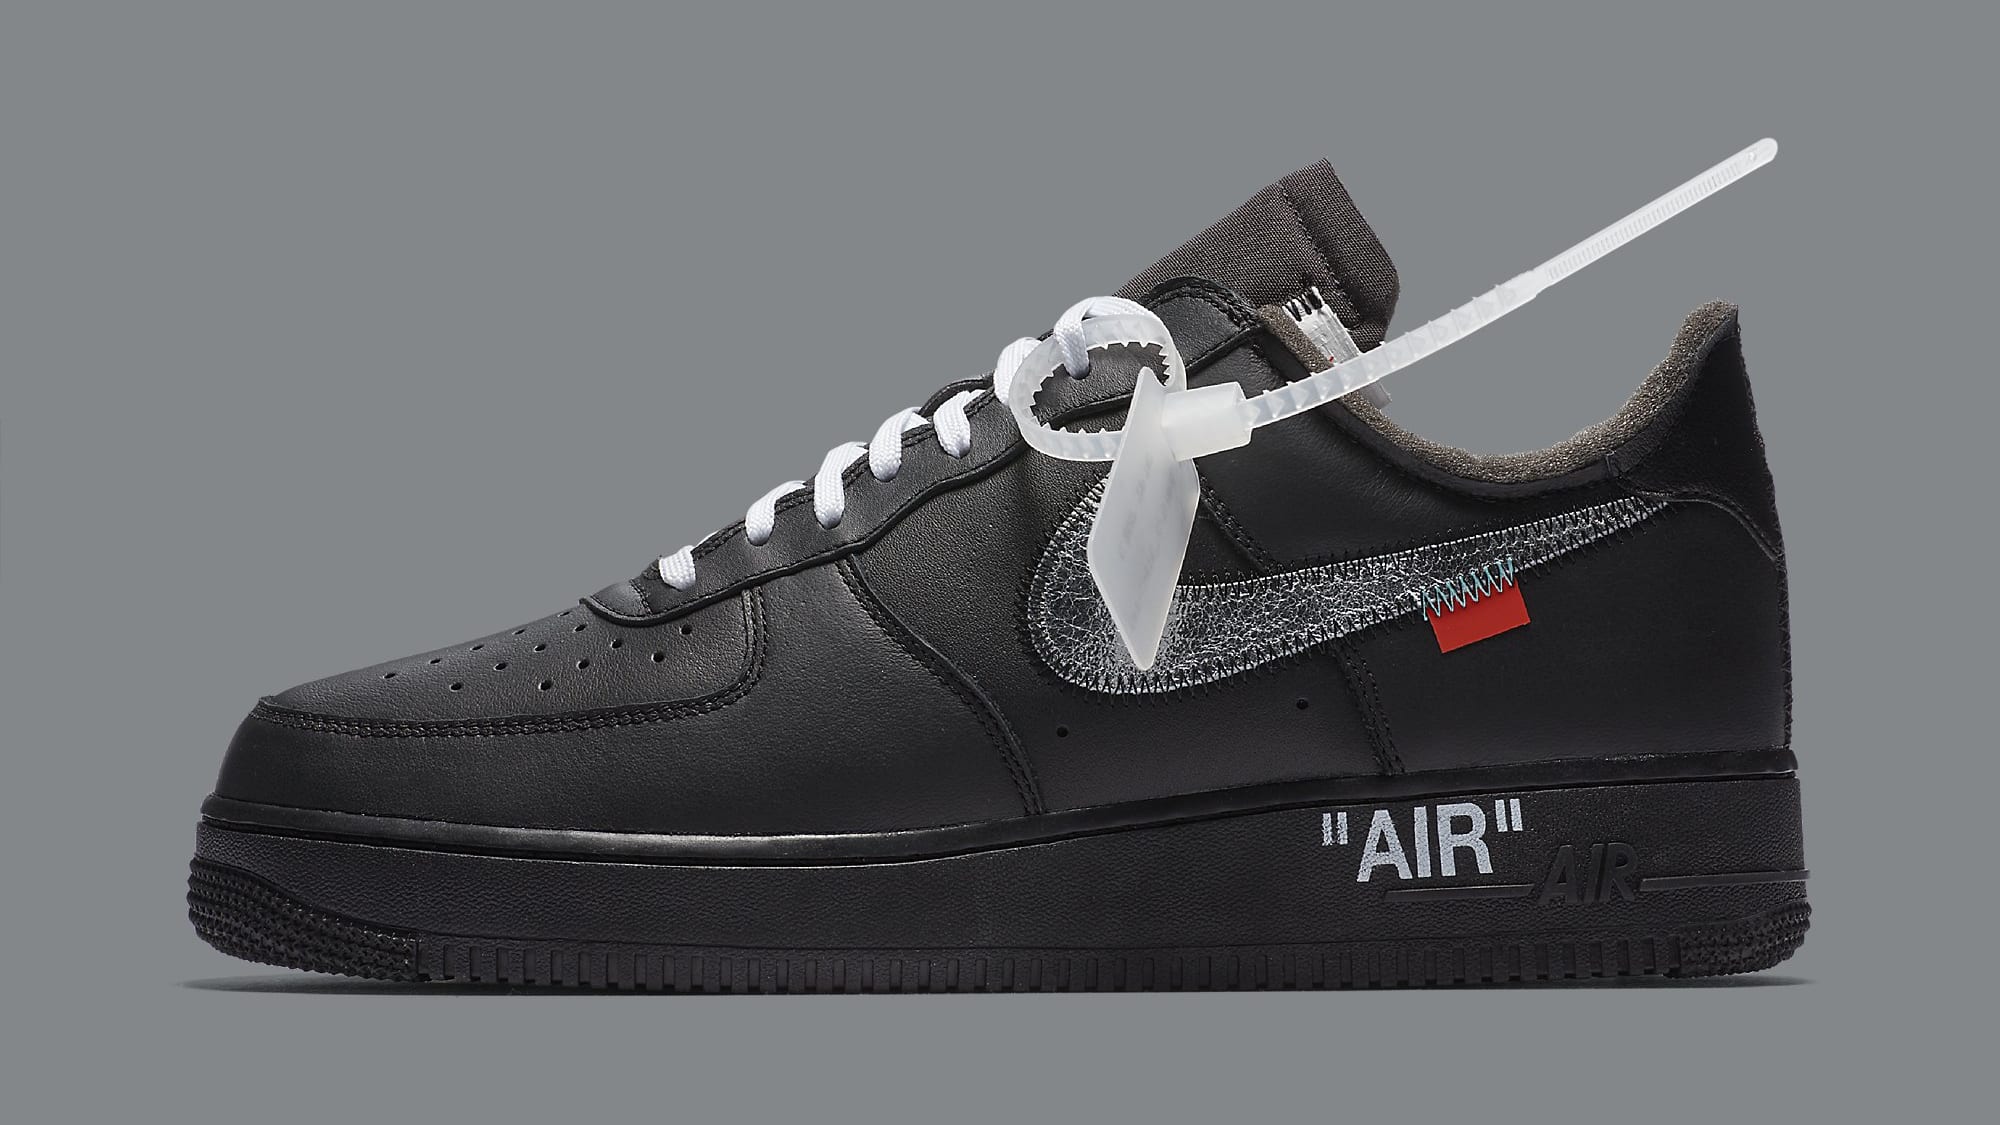 Off-White x Nike AF1 Low MoMa Images Surface, Sparking Release Rumors